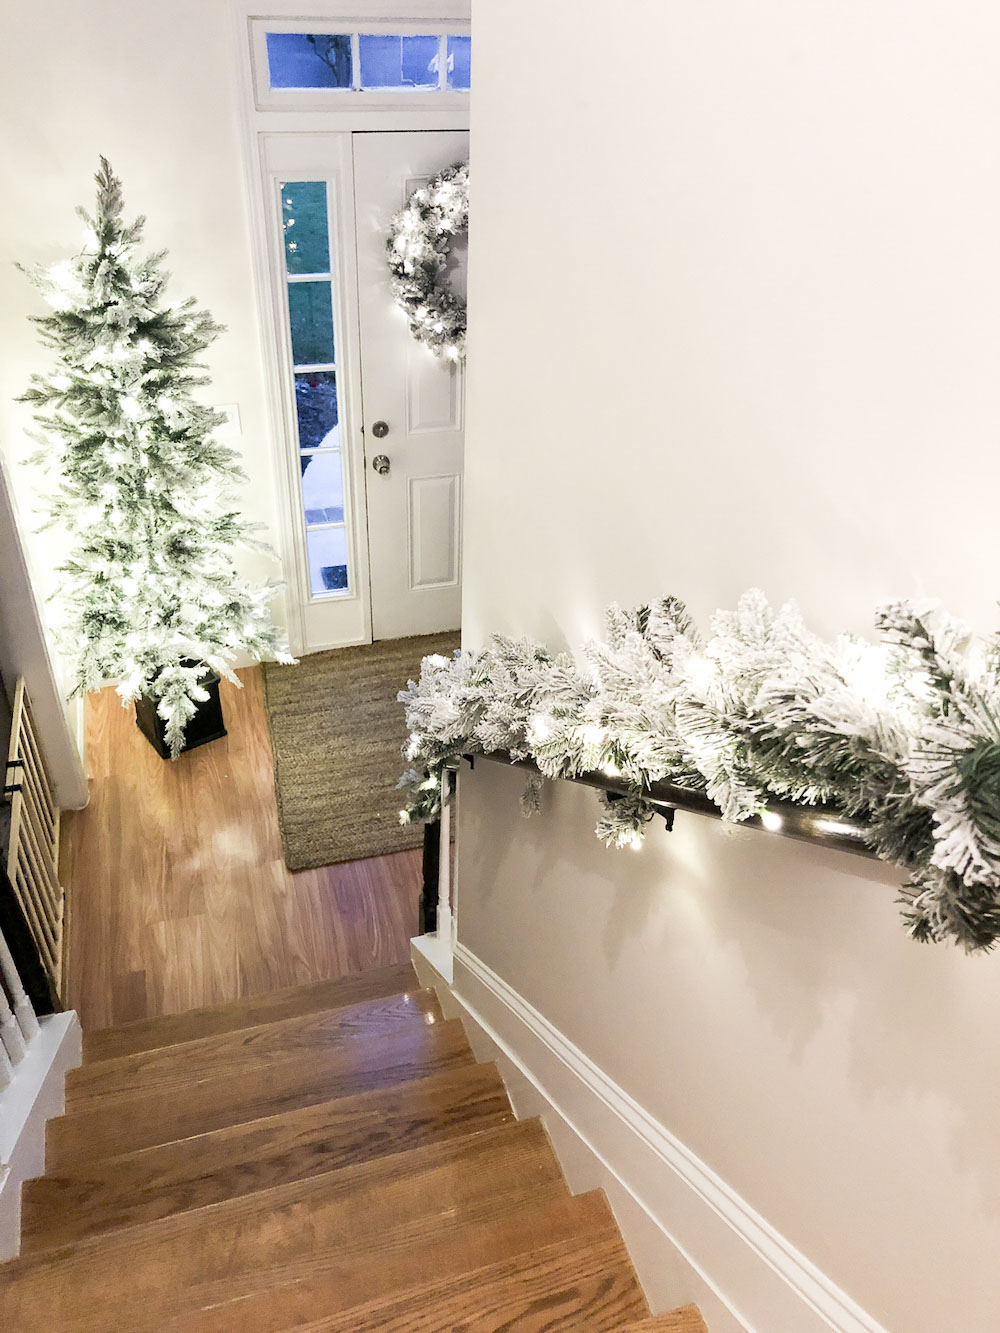 Holiday Greenery on Display in our Entryway